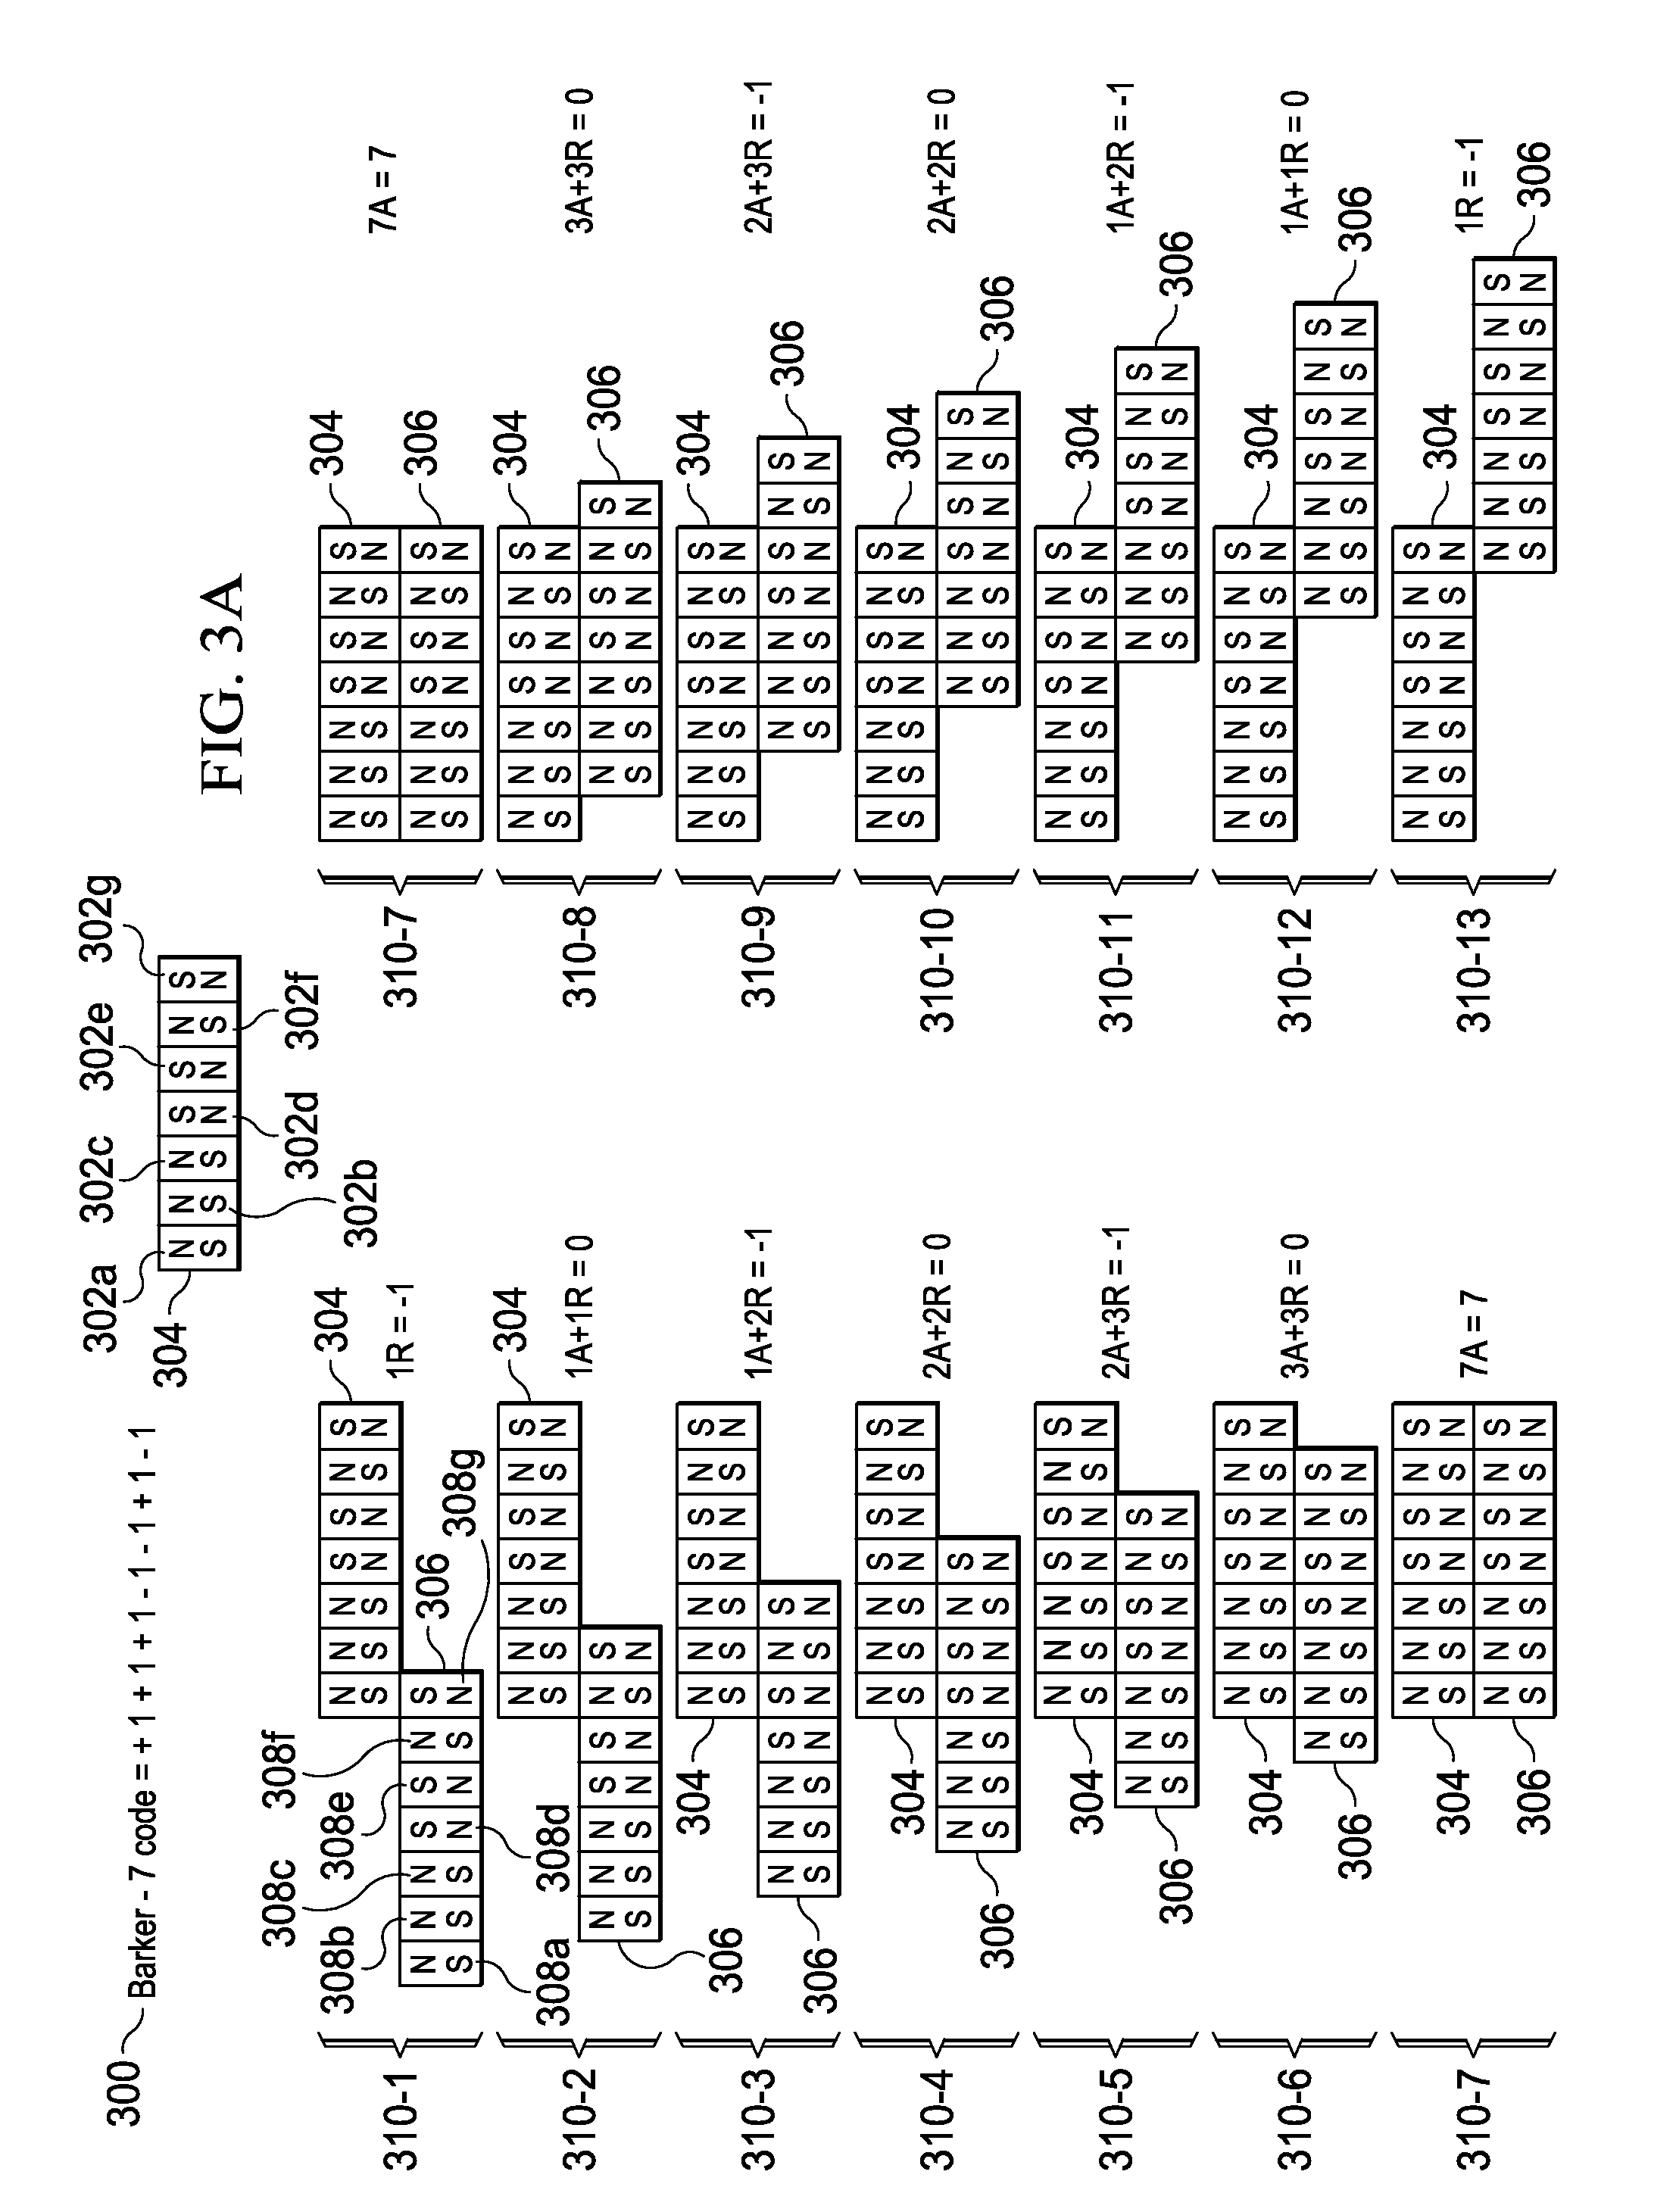 Correlated Magnetic Belt and Method for Using the Correlated Magnetic Belt